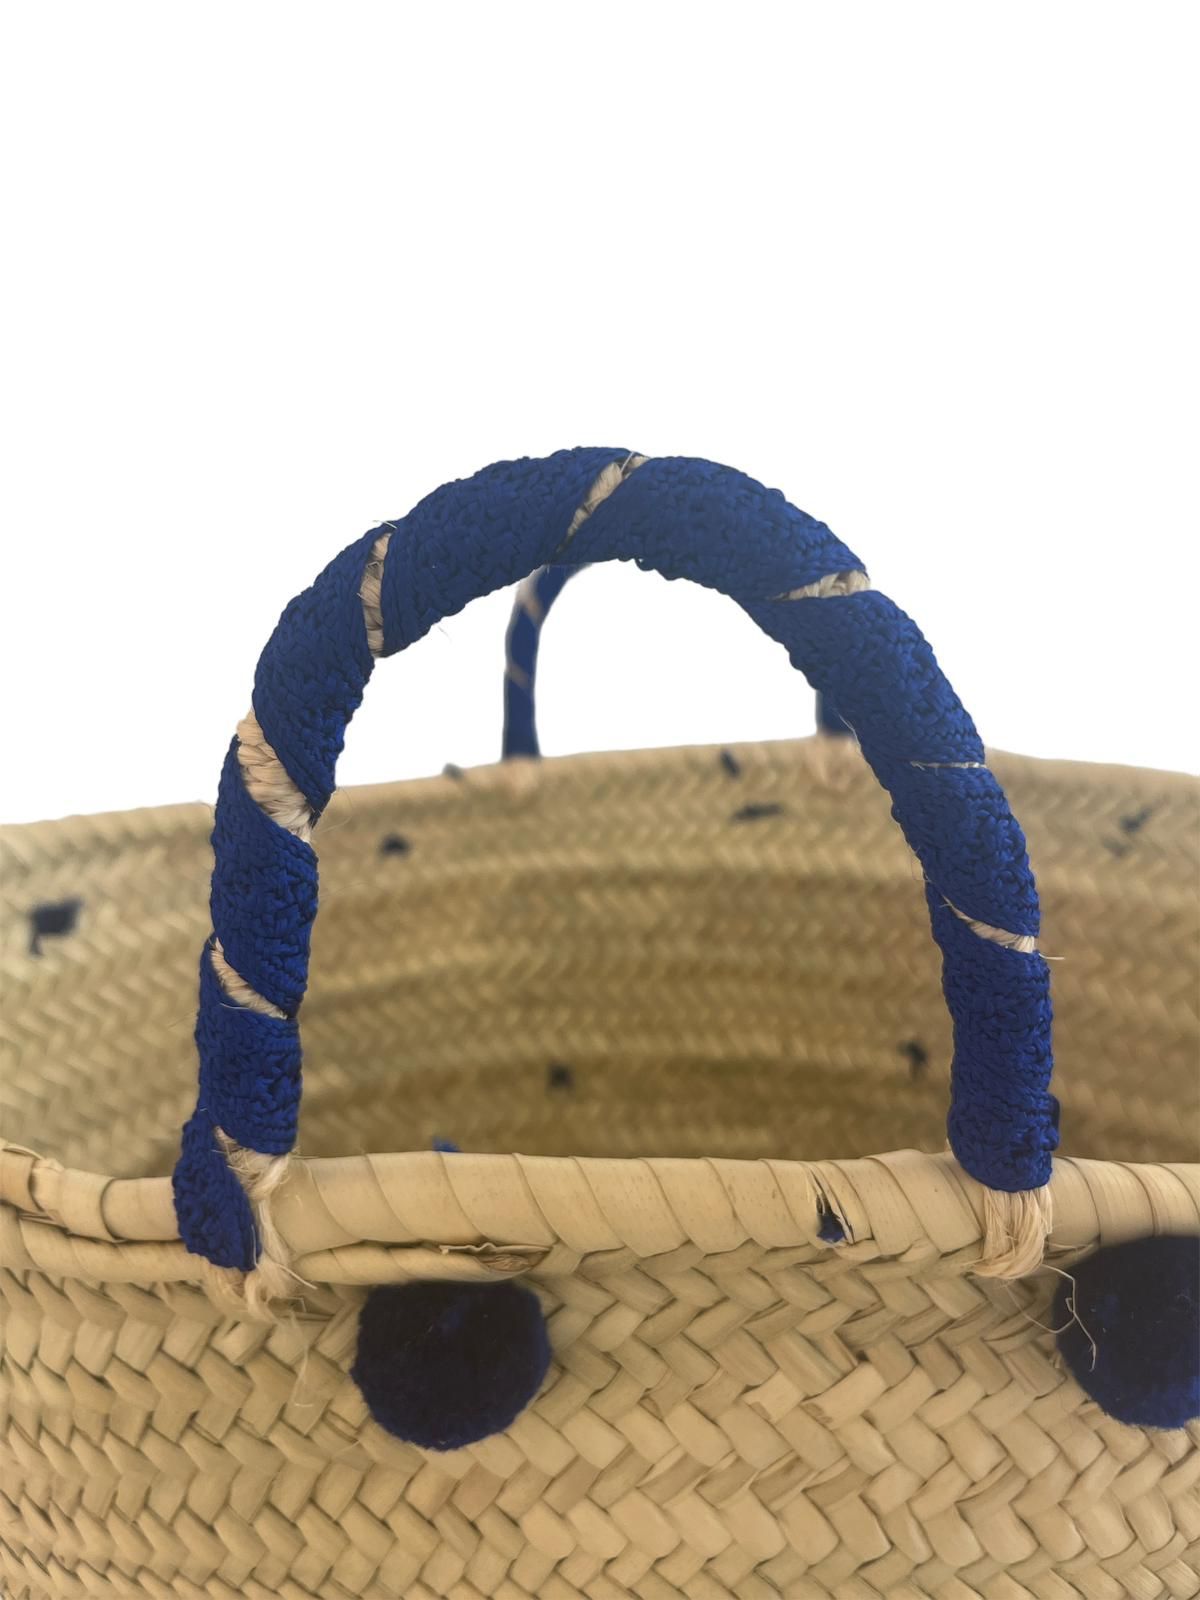 Handmade and woven bag in palm leaves with wool embroidery, Blue Pon Pon motif